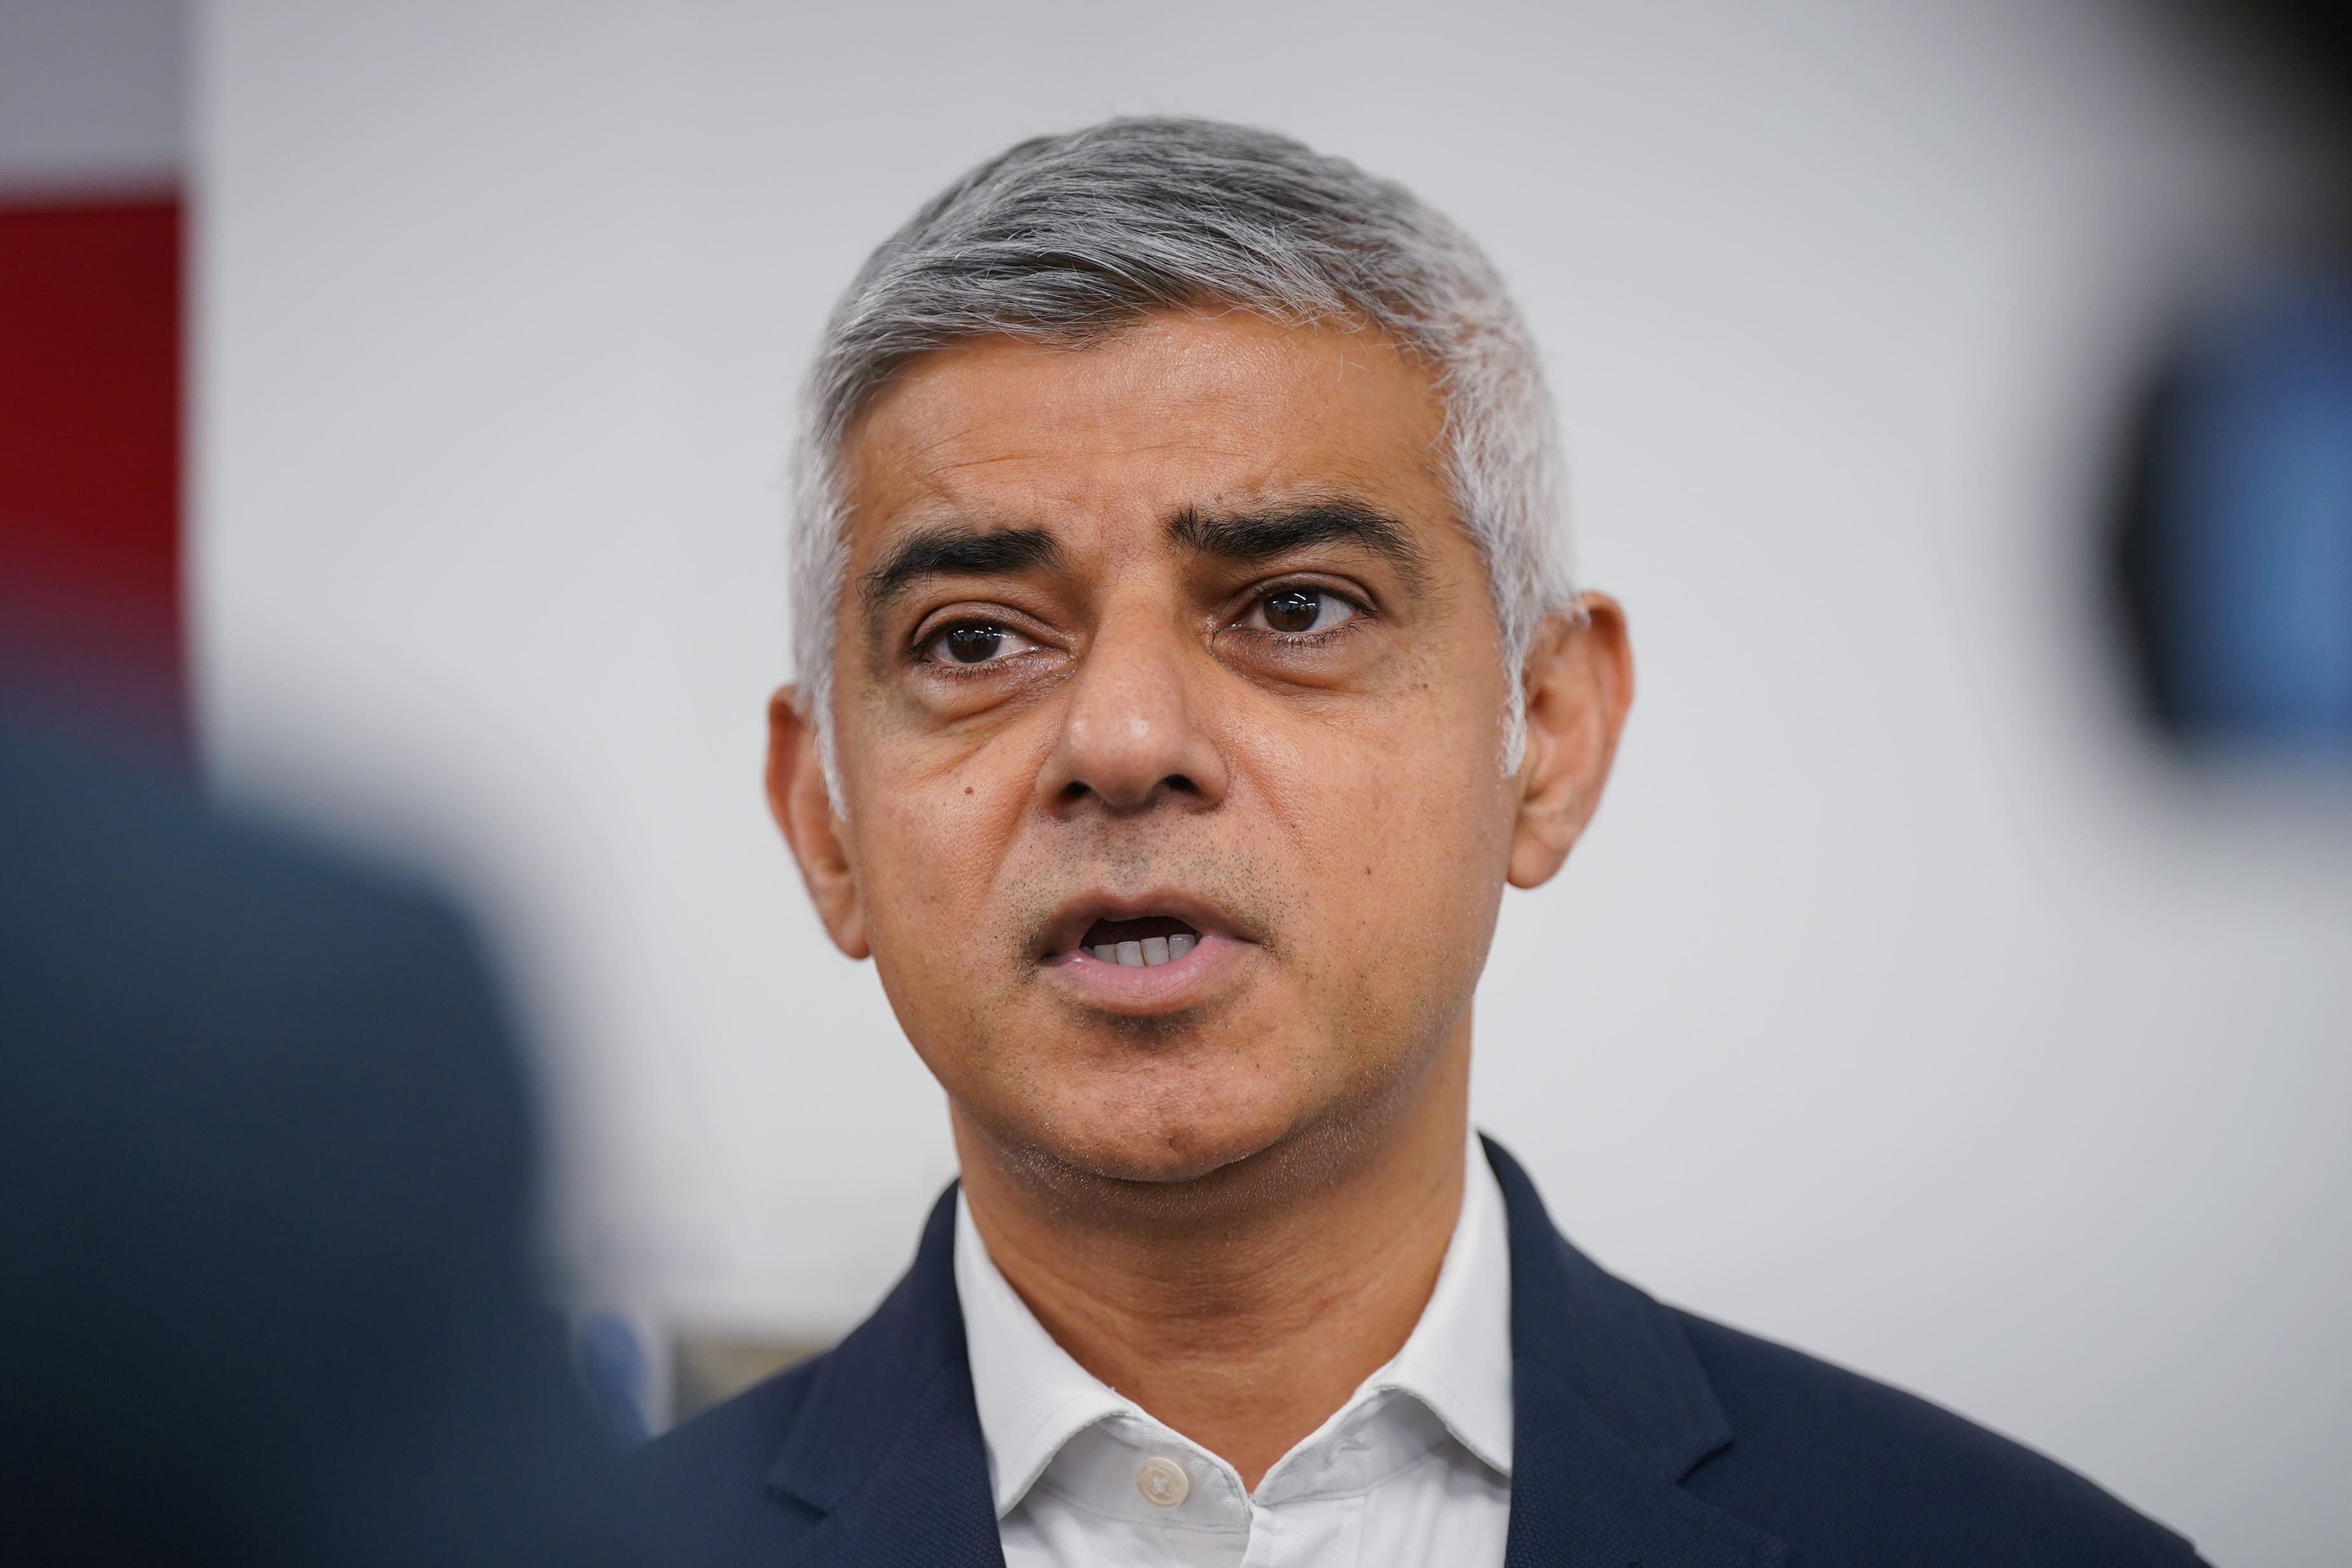 Labour Mayor of London Sadiq Khan has backed calls for a ceasefire in the Israel-Hamas conflict